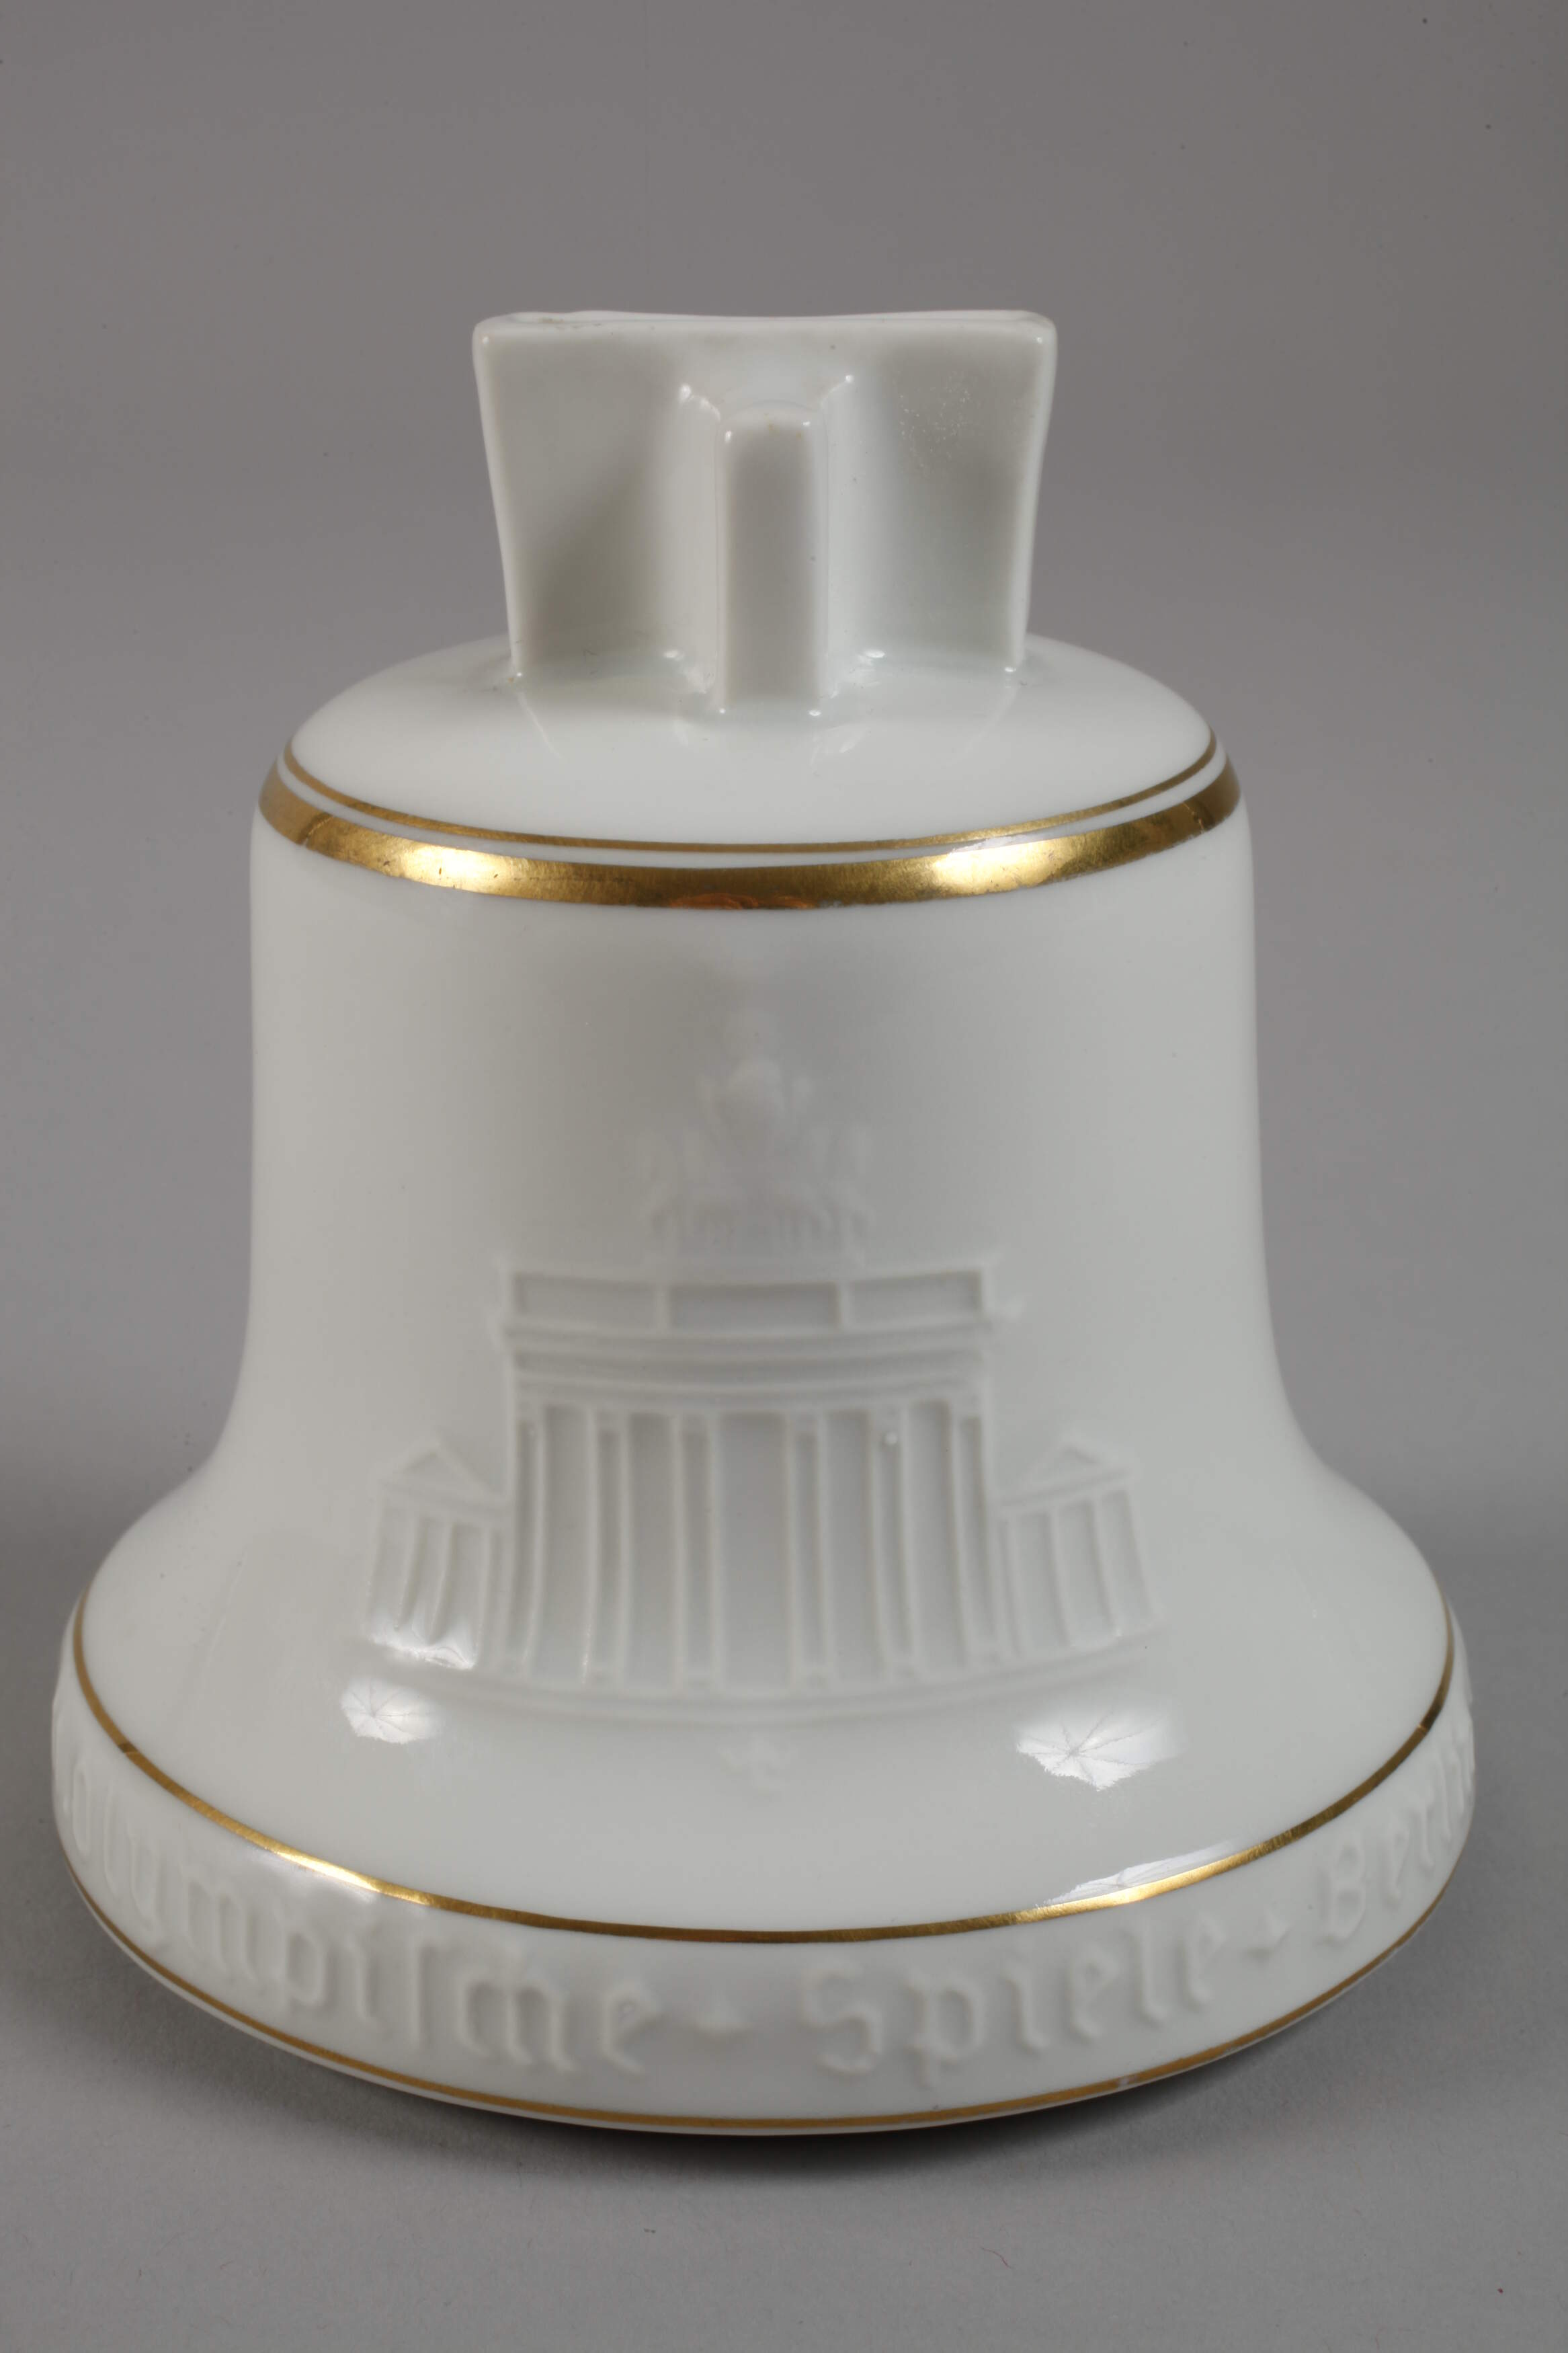 Porcelain bell Olympia 1936 - Image 3 of 5